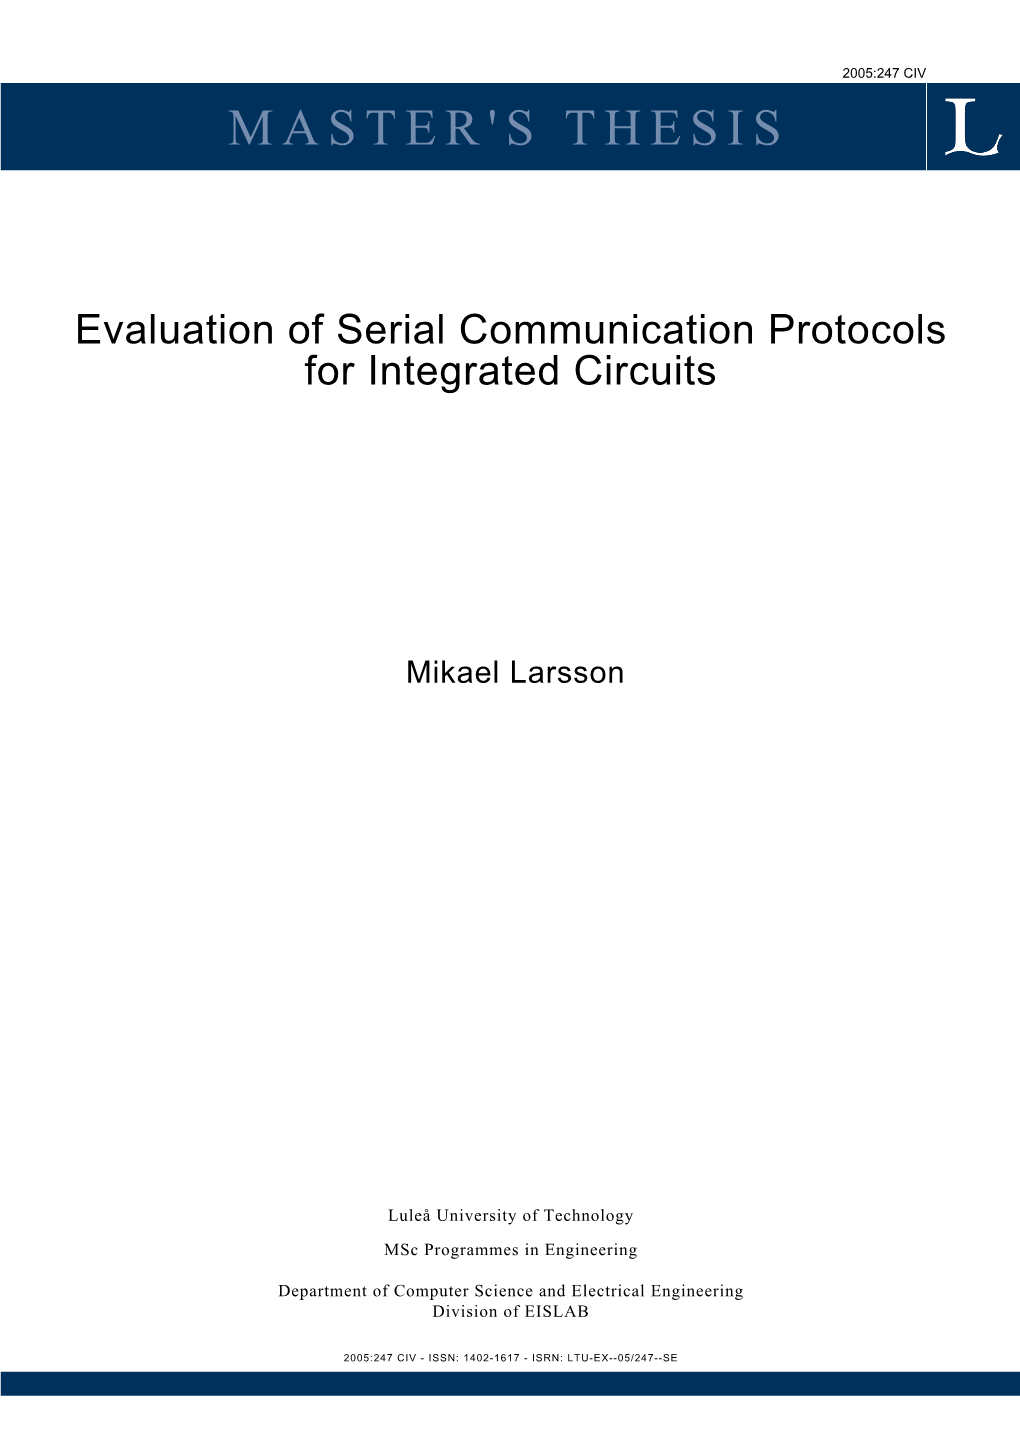 Evaluation of Serial Communication Protocols for Integrated Circuits